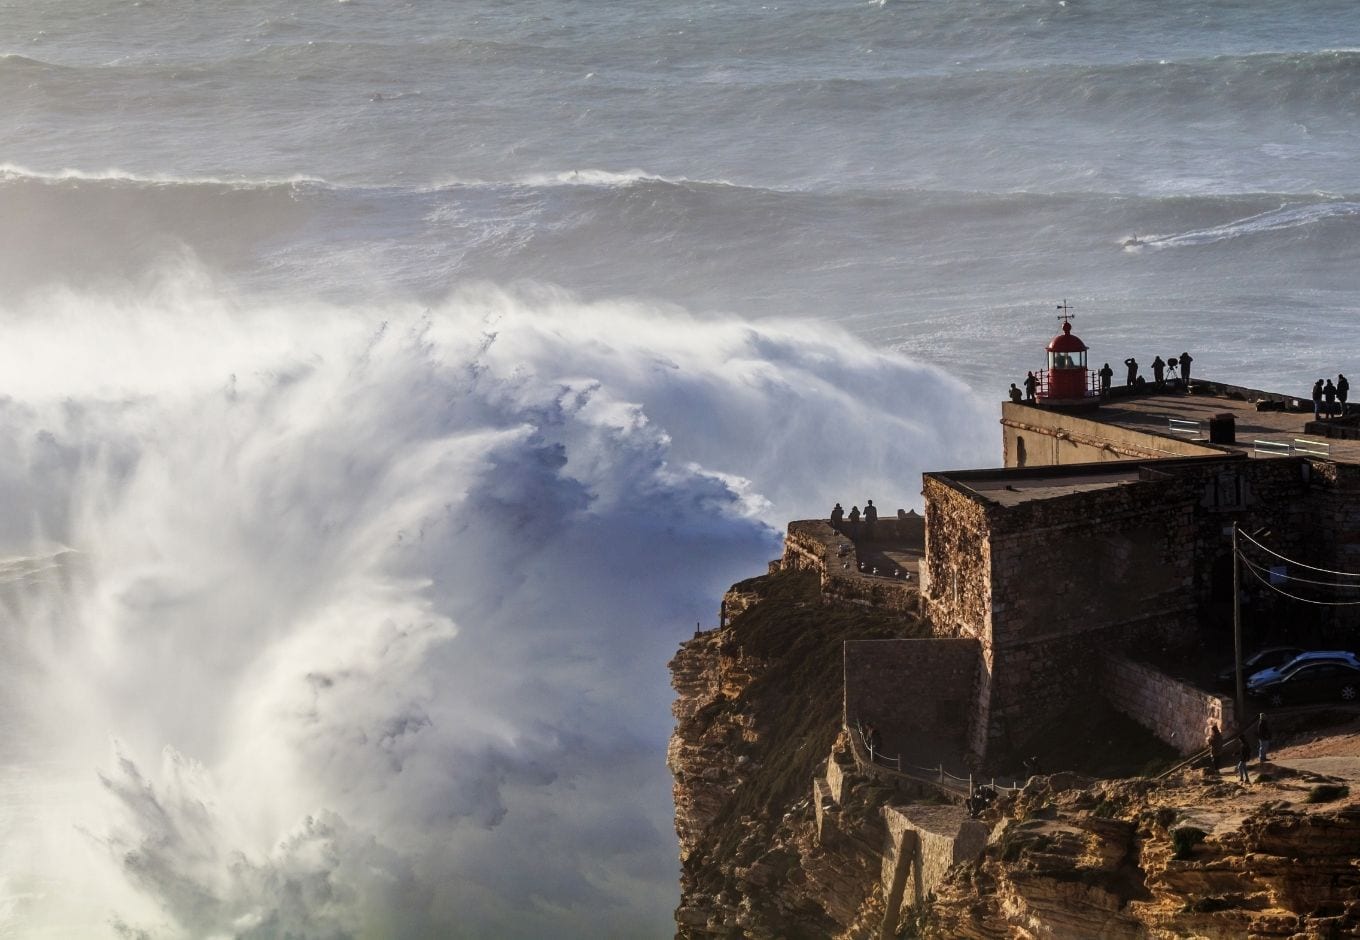 View of a giant Nazaré Wave and the lighthouse at Praia do Norte.